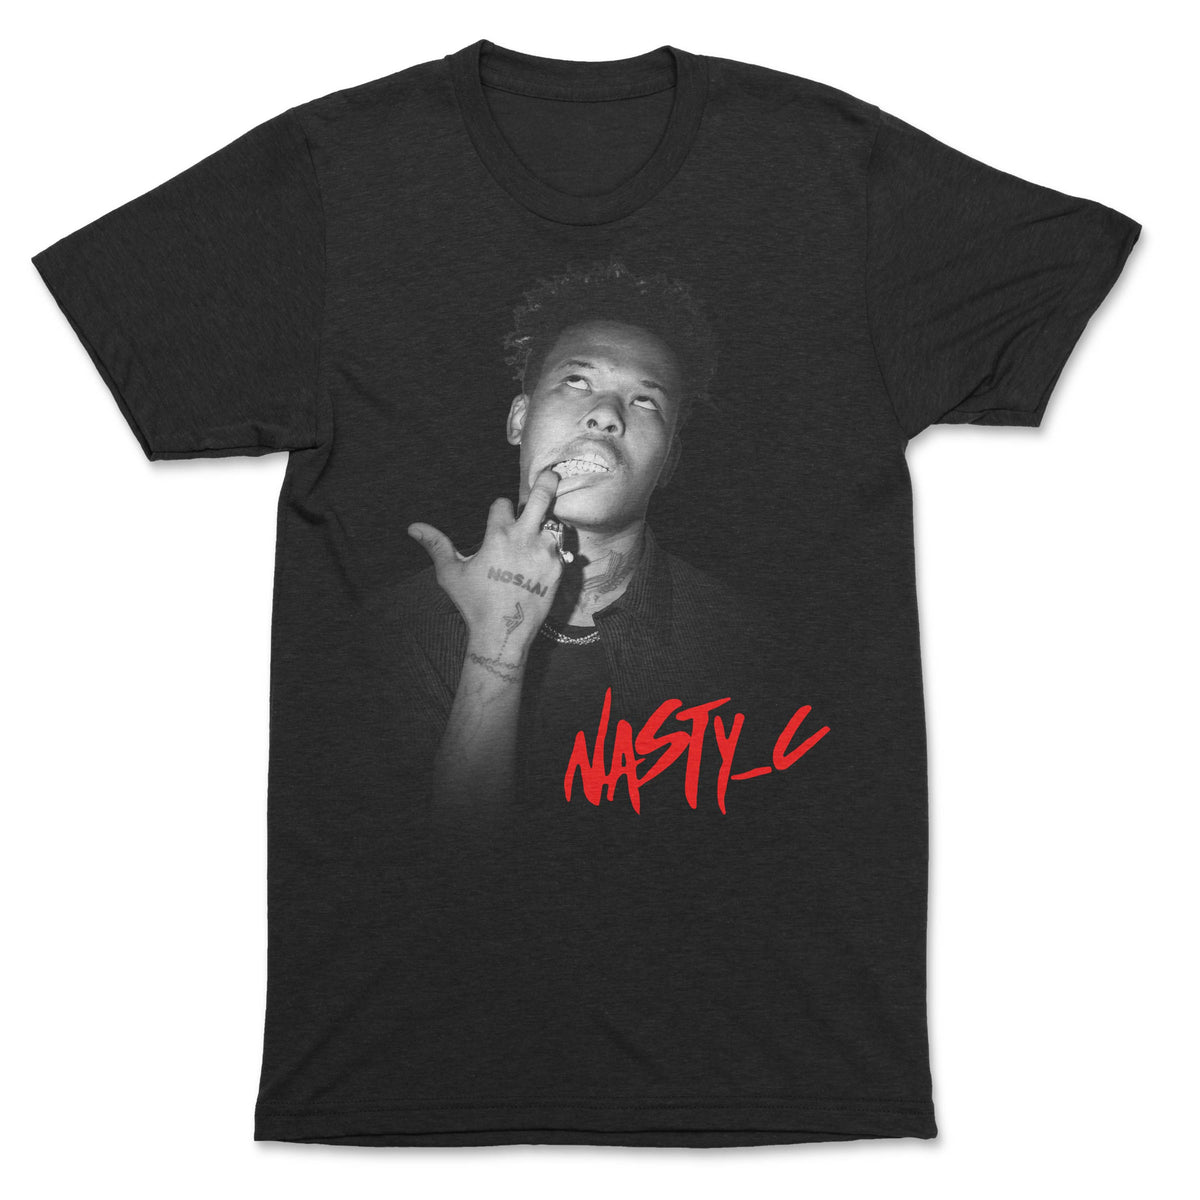 Nasty C - Hooked Black T-Shirt - OnlyArtistsOfficial